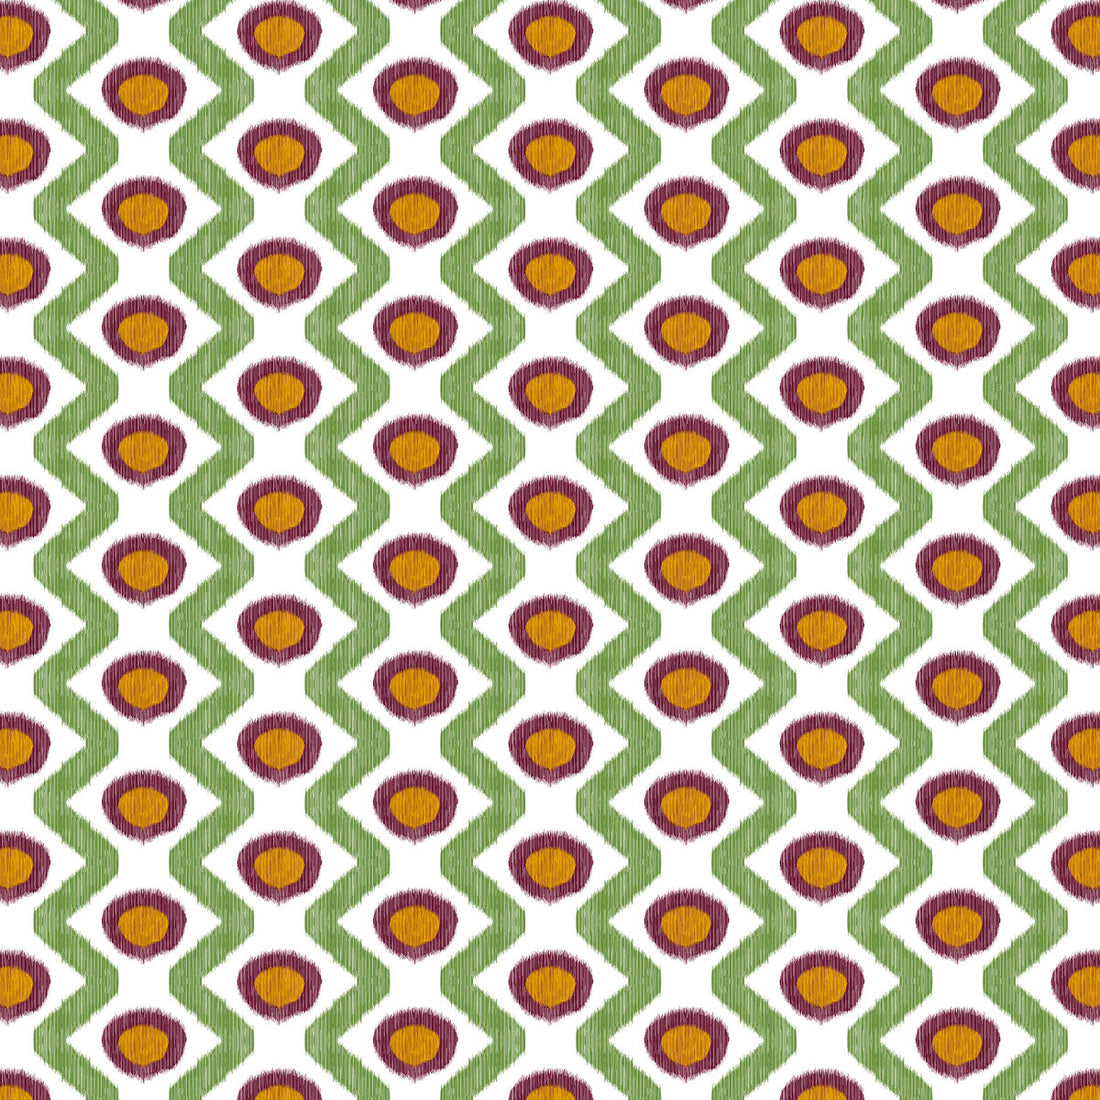 Cala Marsal fabric in verde burdeos color - pattern GDT5681.003.0 - by Gaston y Daniela in the Gaston Maiorica collection